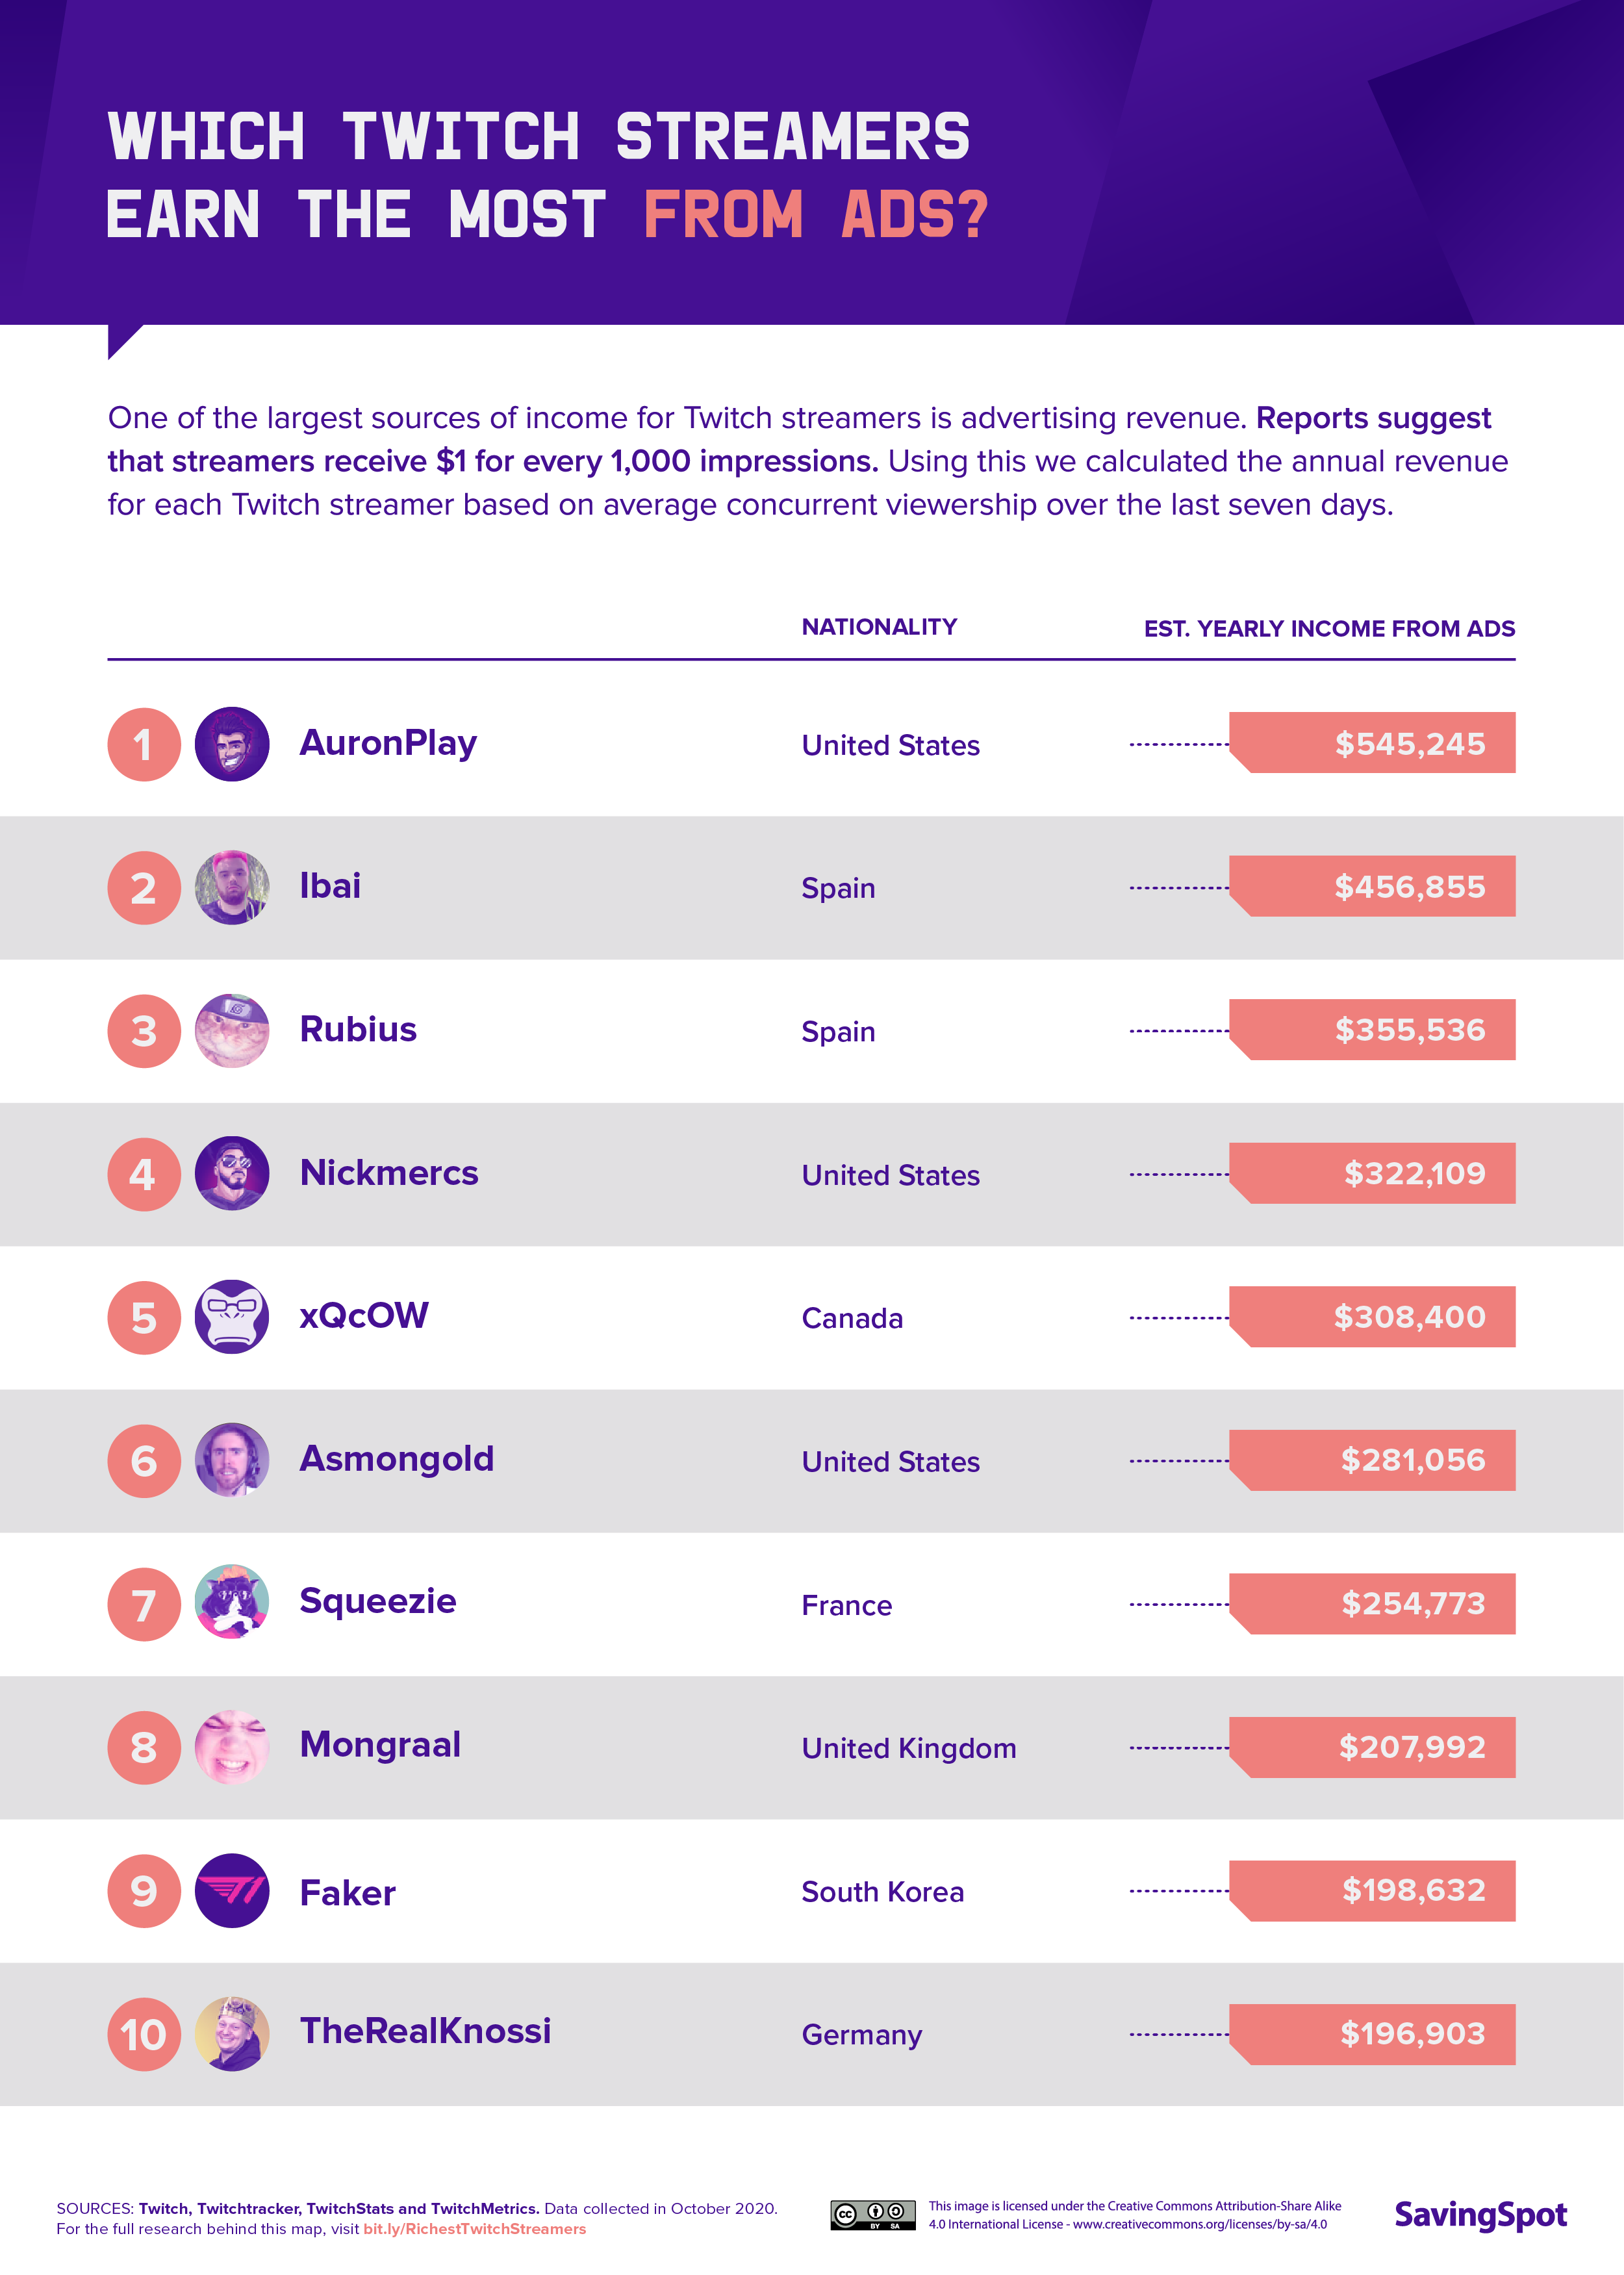 Twitch Streamers Earn the Most from Ads